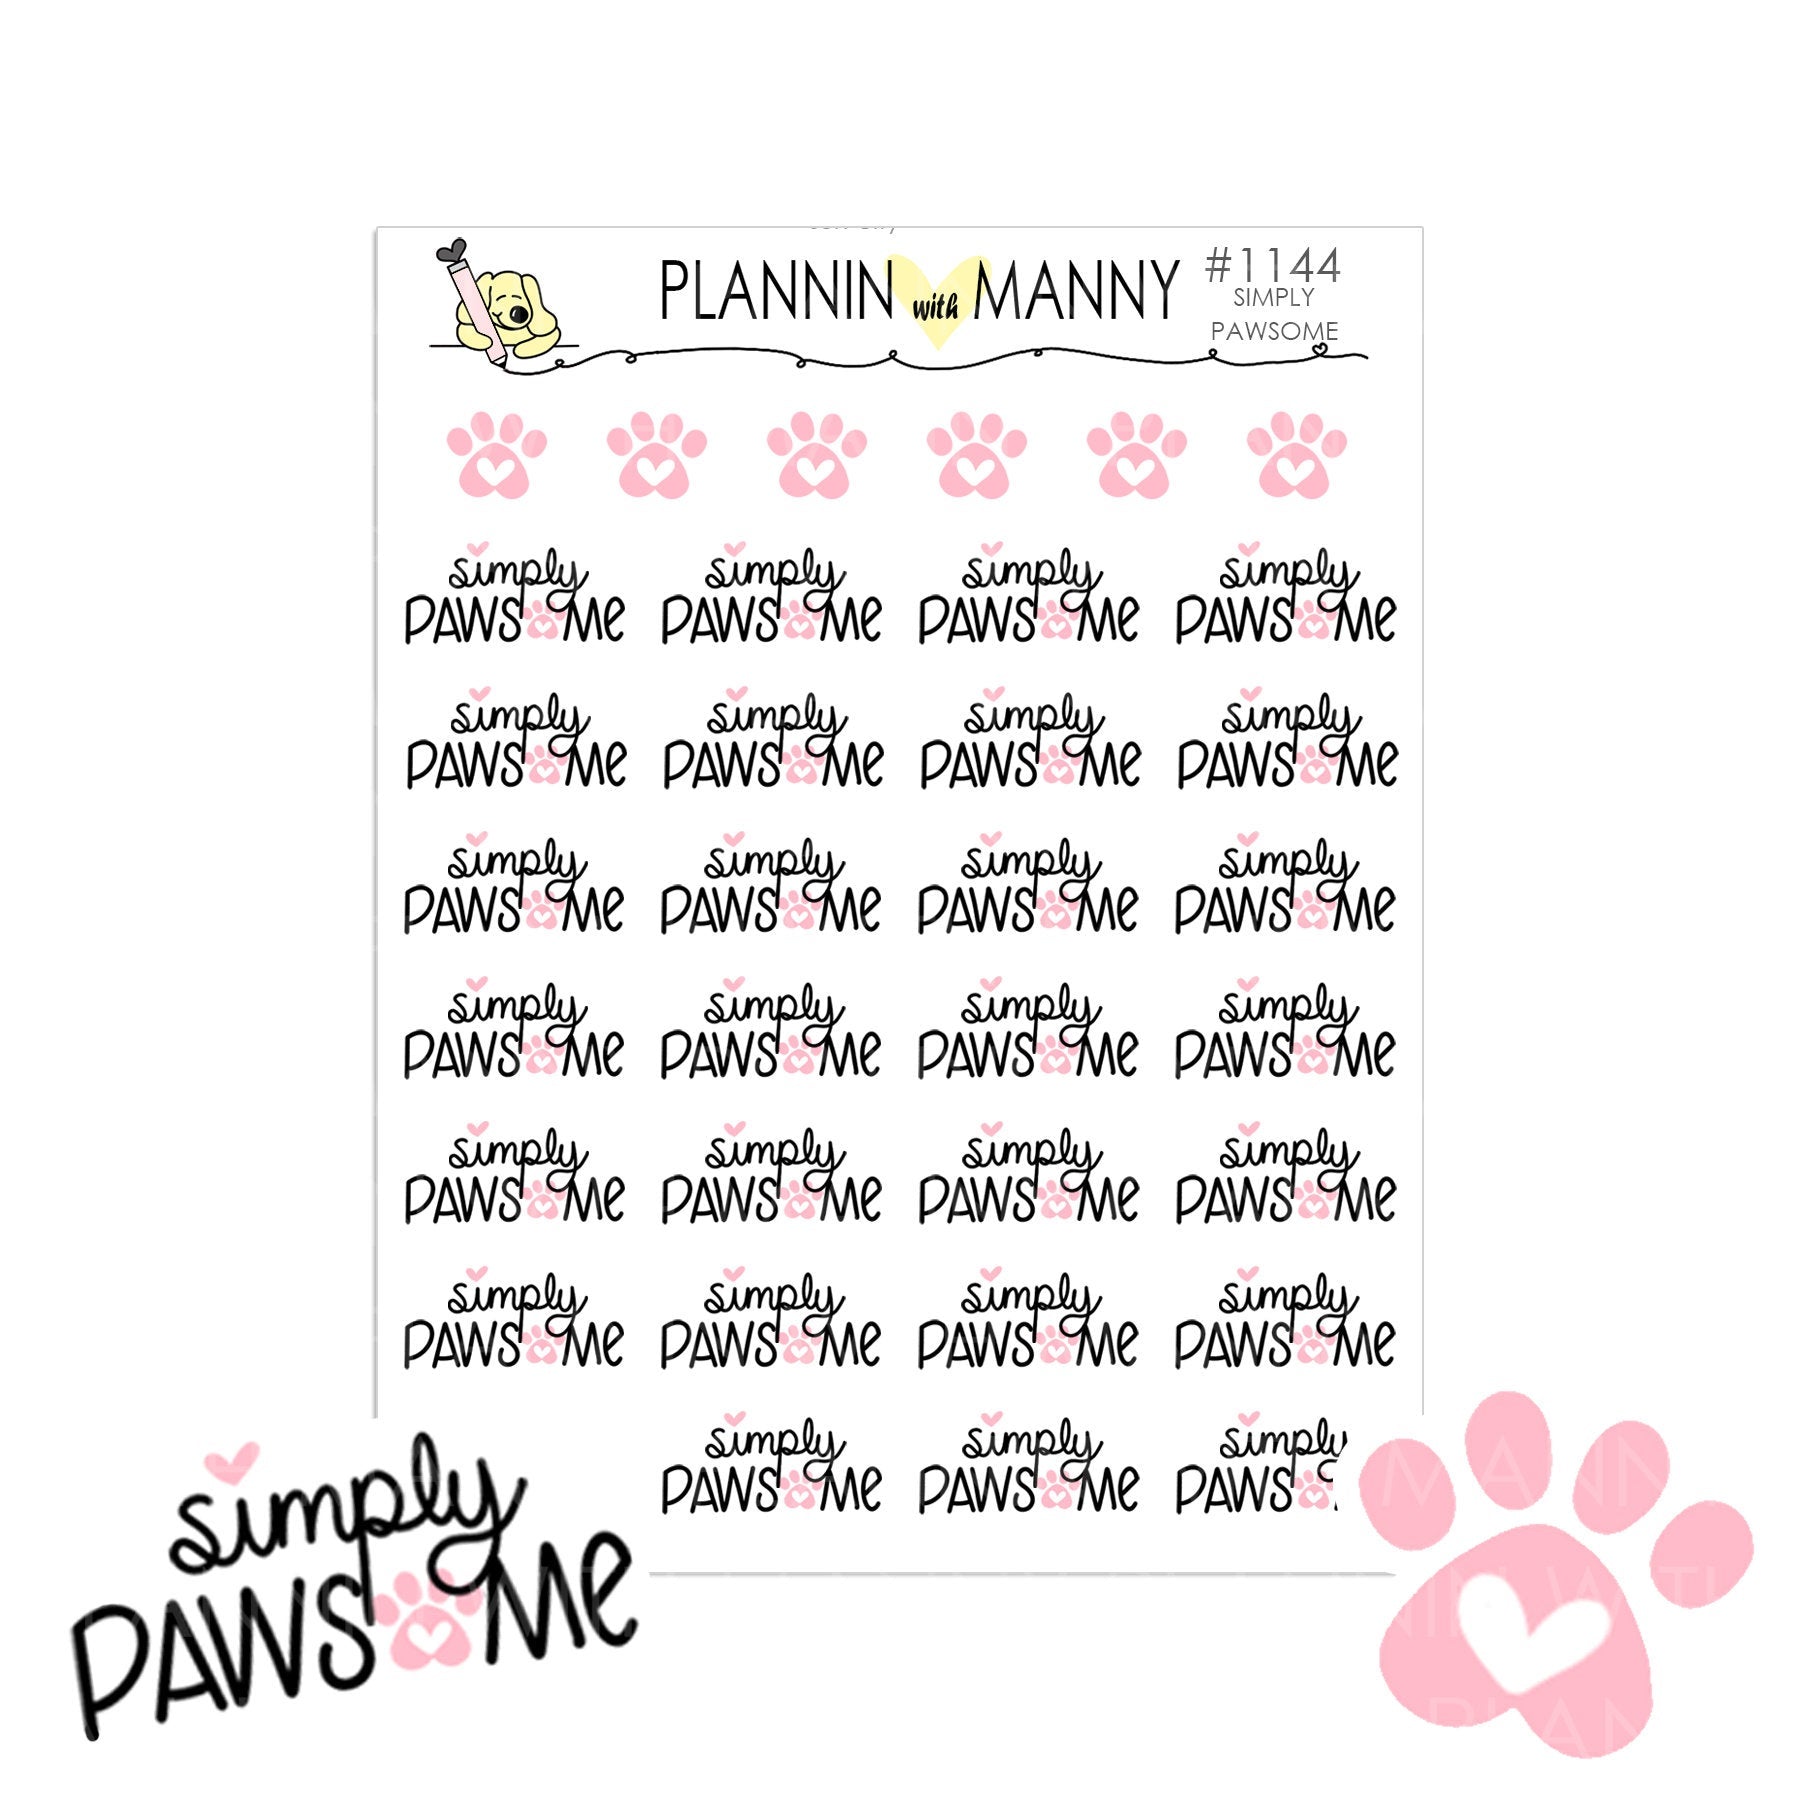 1144 SIMPLY PAWSOME Planner Stickers